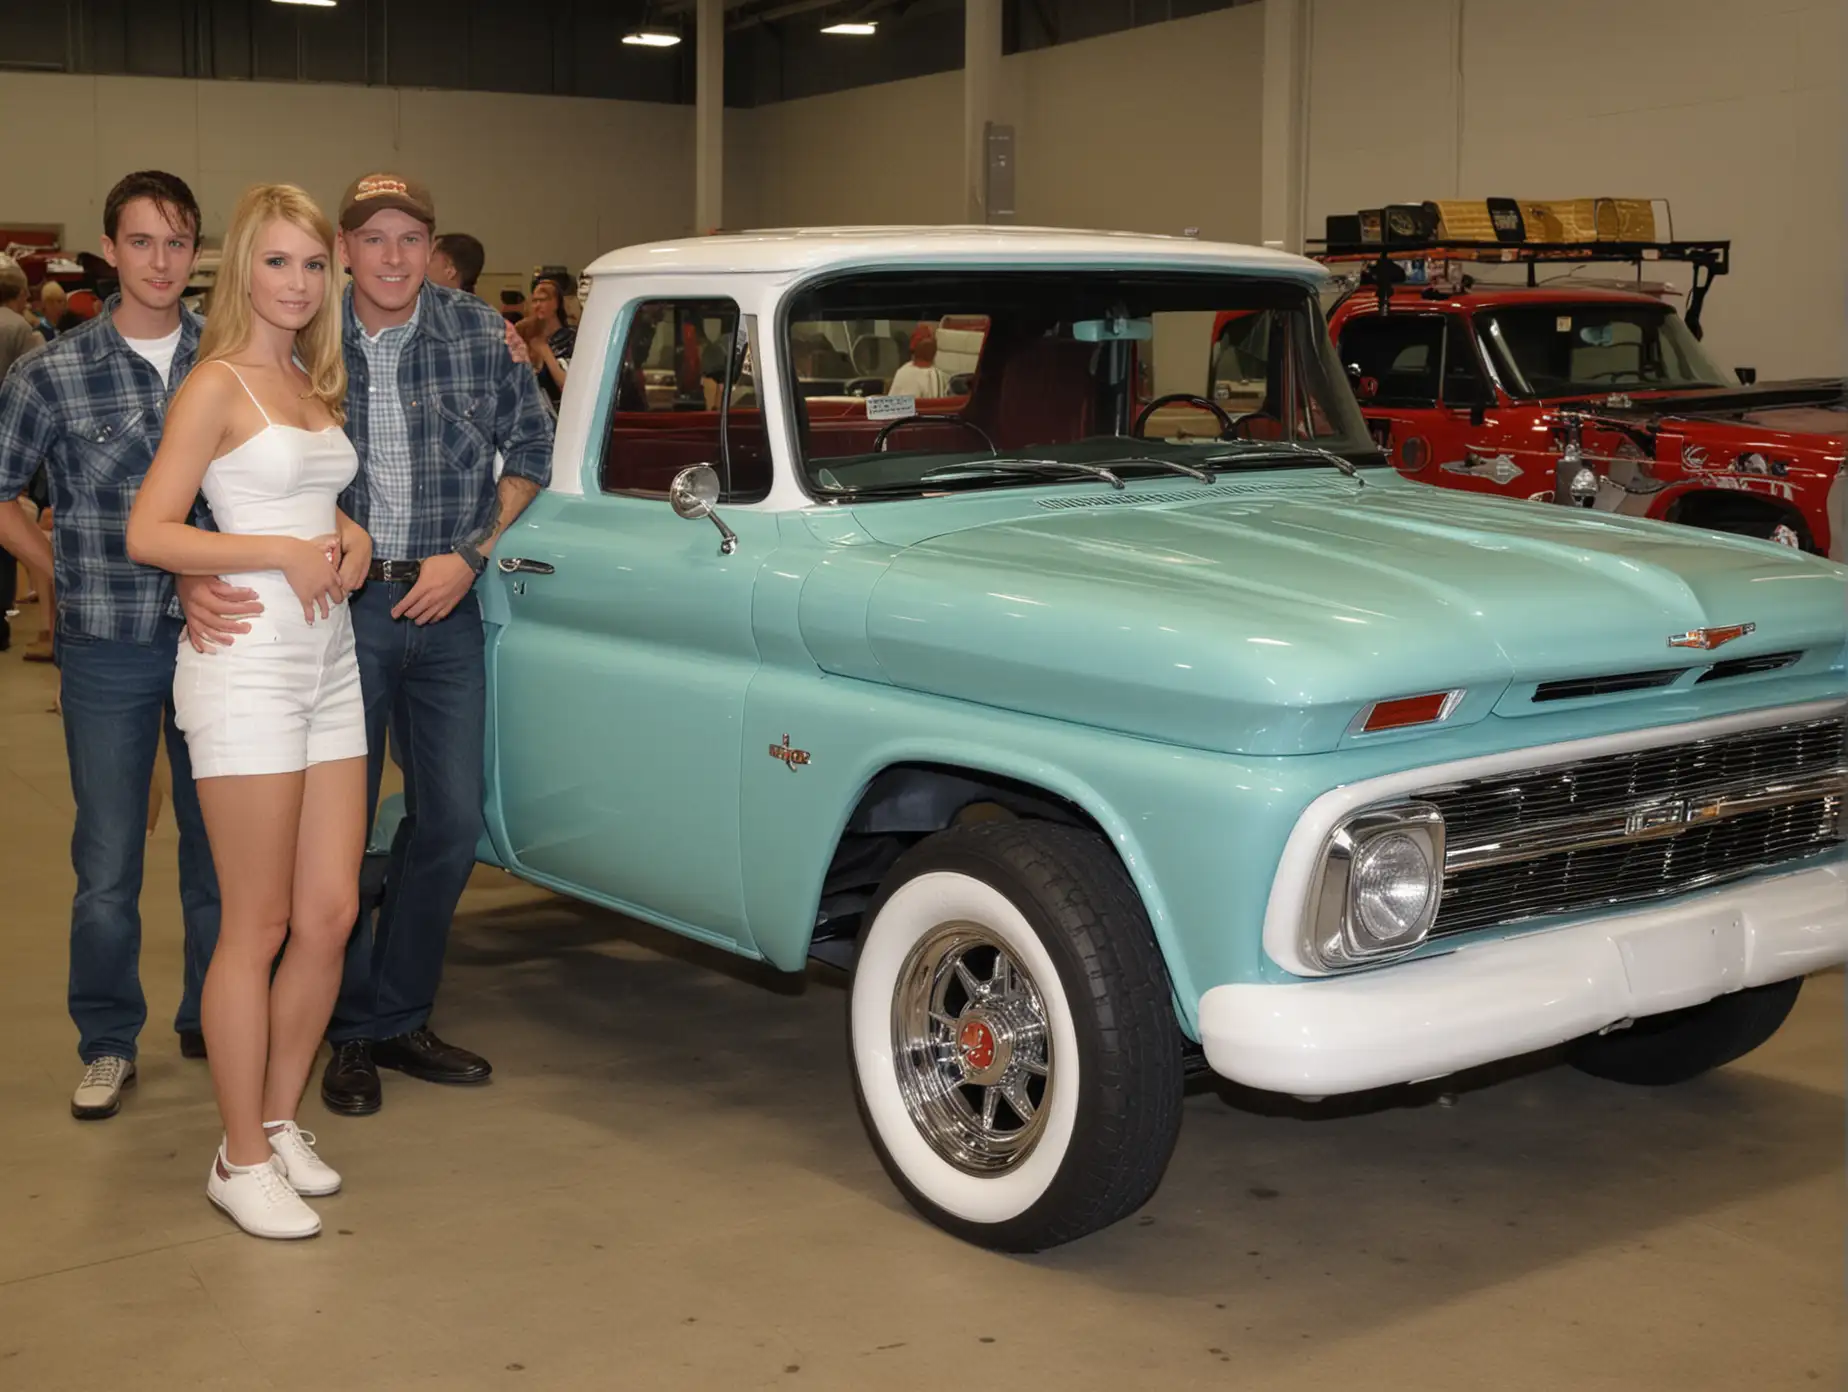 Vintage-1964-Chevrolet-C10-Pickup-Displayed-at-Indoor-Collectors-Car-Show-with-Young-Couple